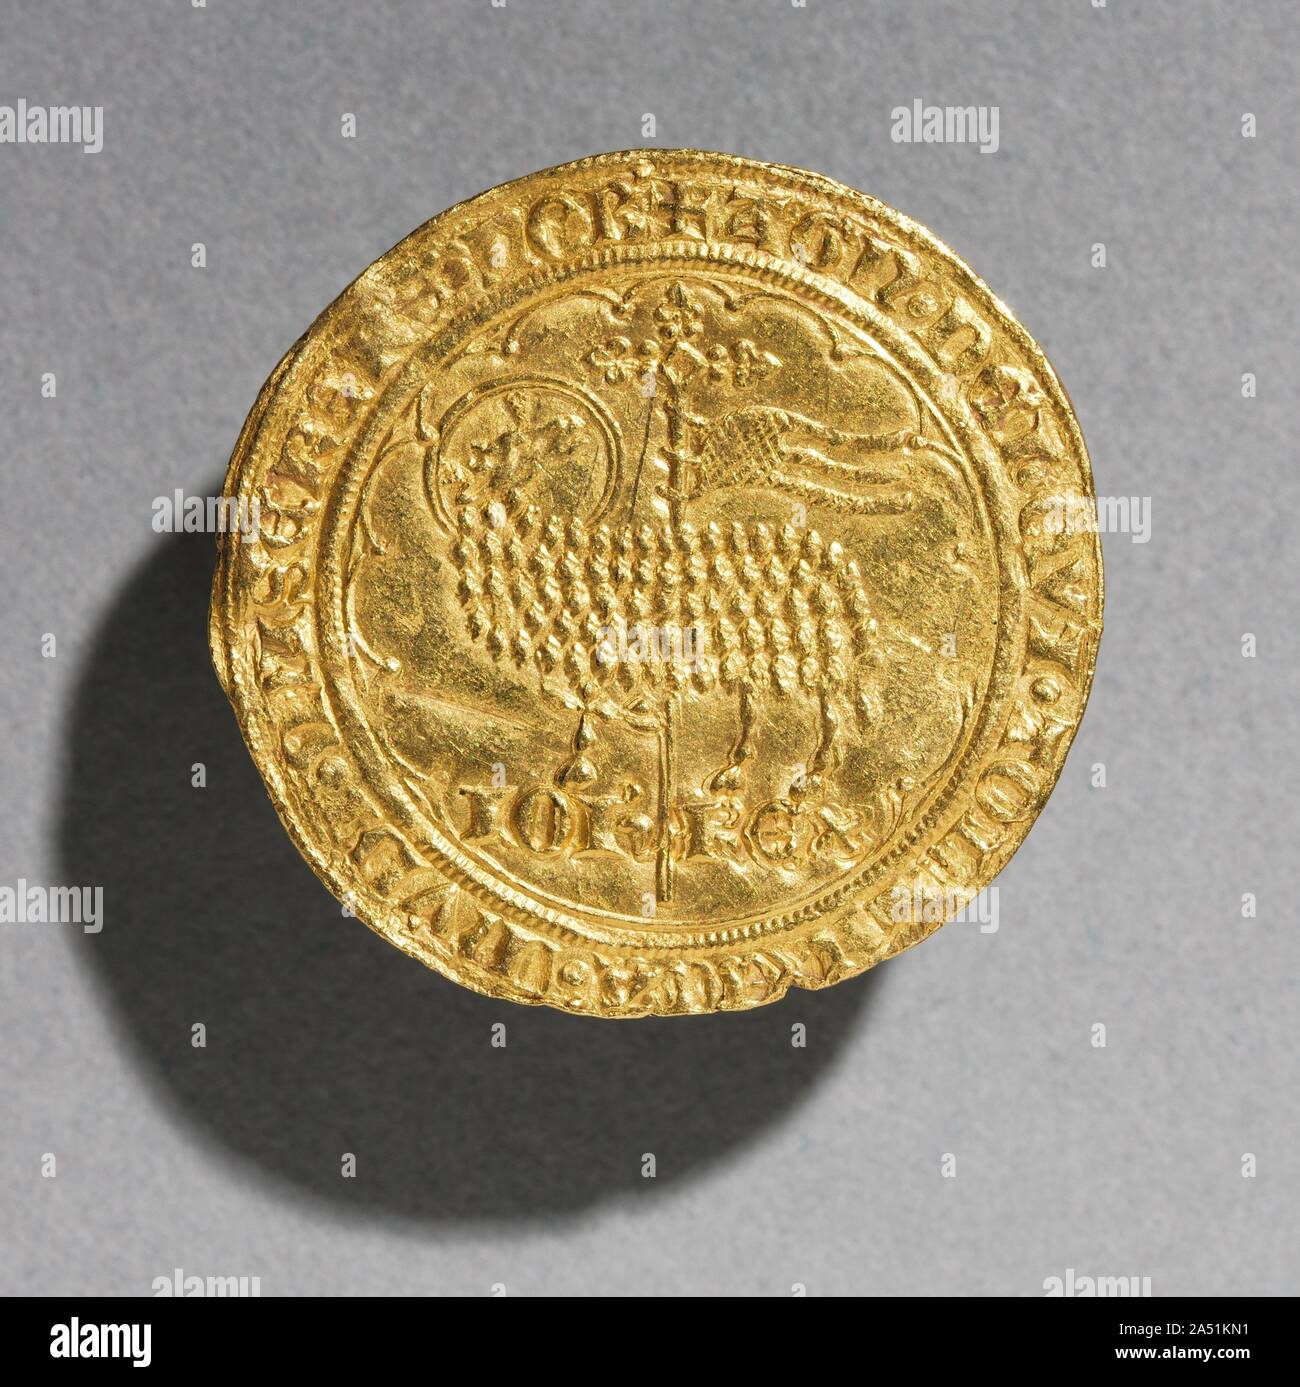 Mouton dOr of King Jean le Bon of France, 1350-1364 , 1350-1364. Because this gold coin represents the Paschal Lamb, a symbol of Christ, on one of its faces, it is known as a &quot;Golden Sheep&quot;--Mouton dOr in French. Stock Photo